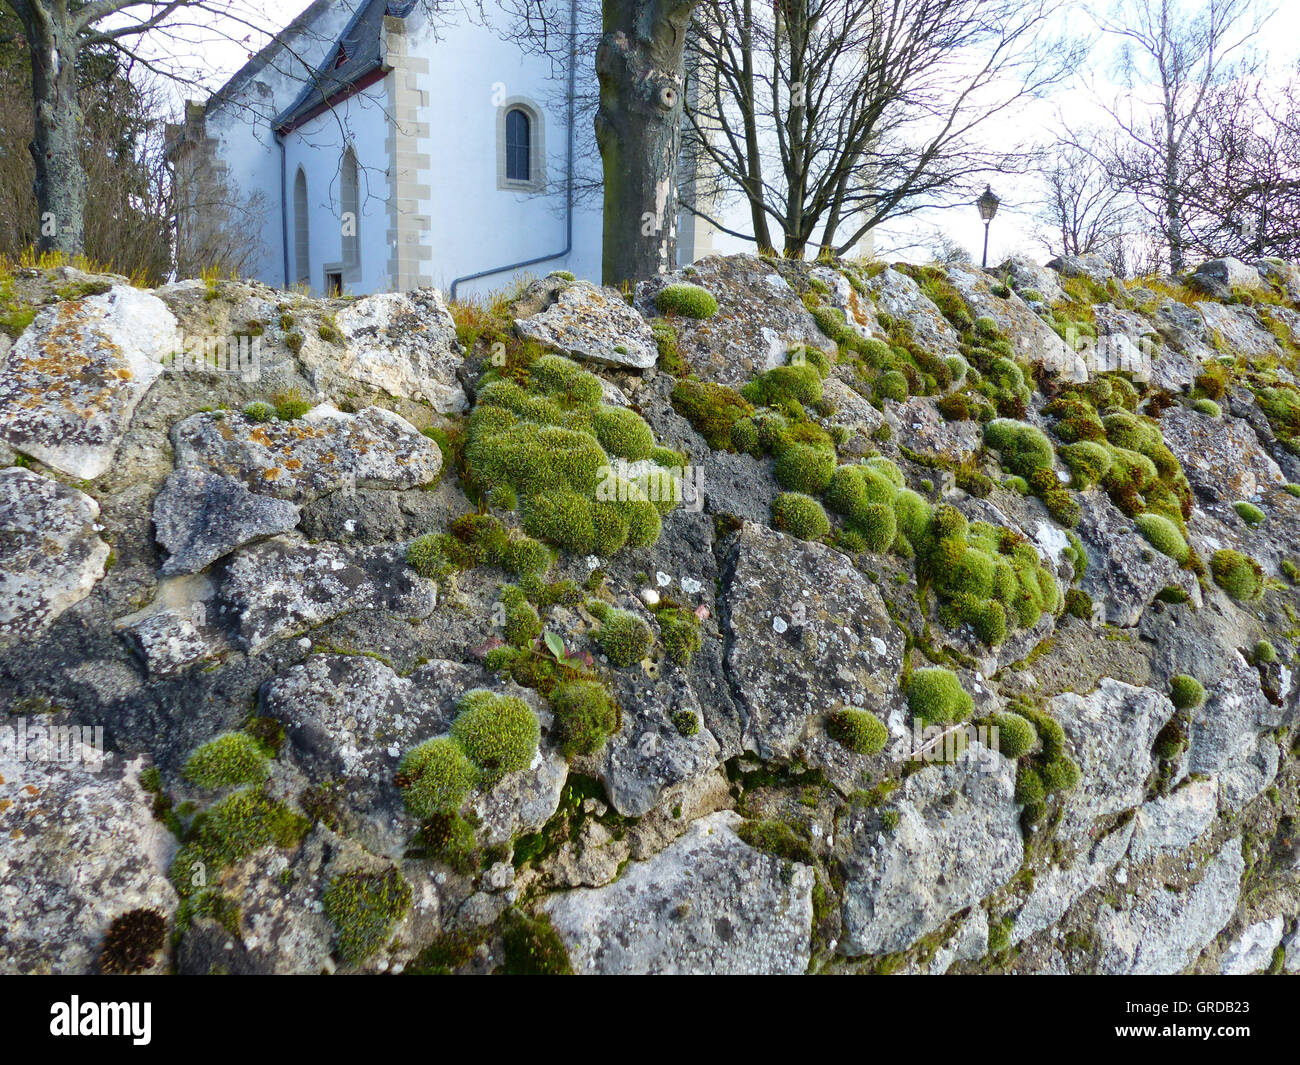 Moss Cushions On A Stone Wall, Behind The Wall There Is A Church Stock Photo